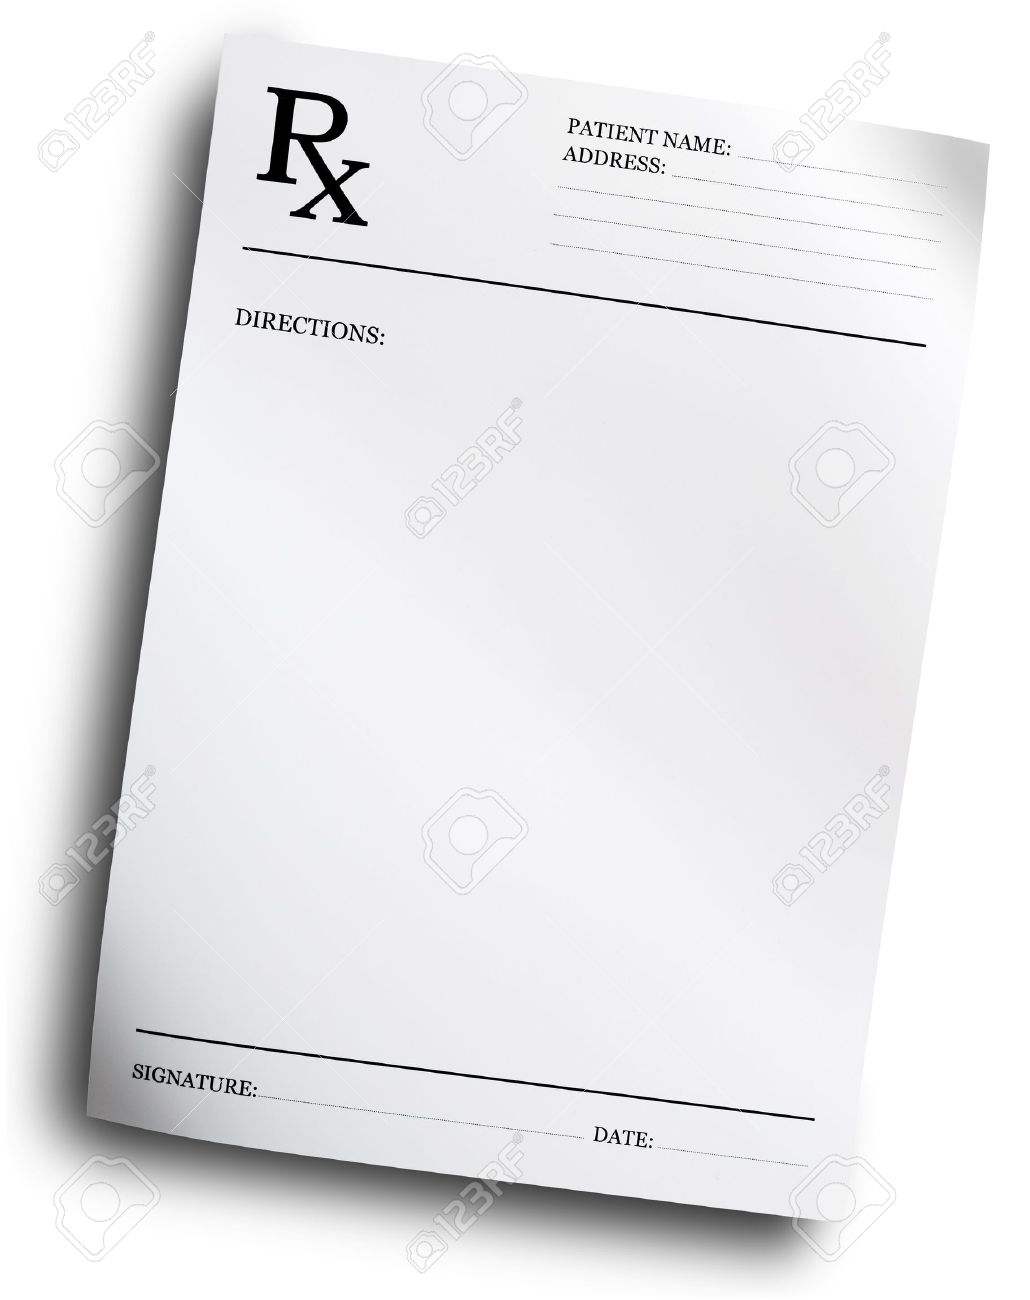 Rx Prescription Form Isolated On White Background Stock Photo